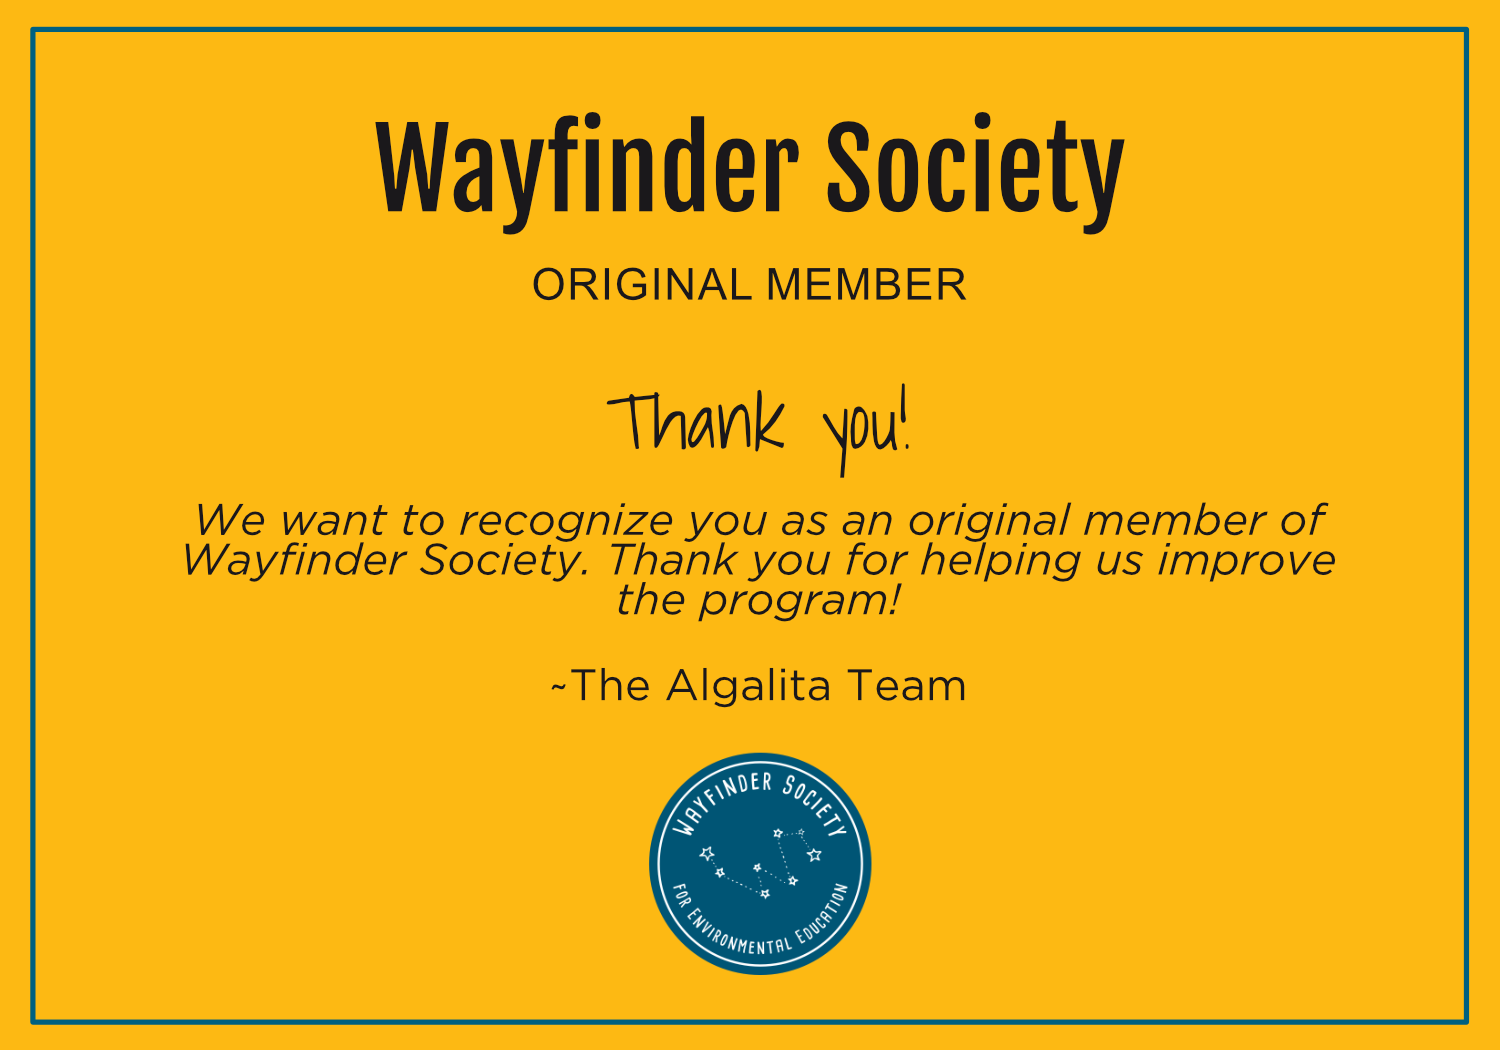 Wayfinder Society Original Member Certificate. We want to recognize you as an original member of<br />
Wayfinder Society. Thank you for helping us improve<br />
the program!